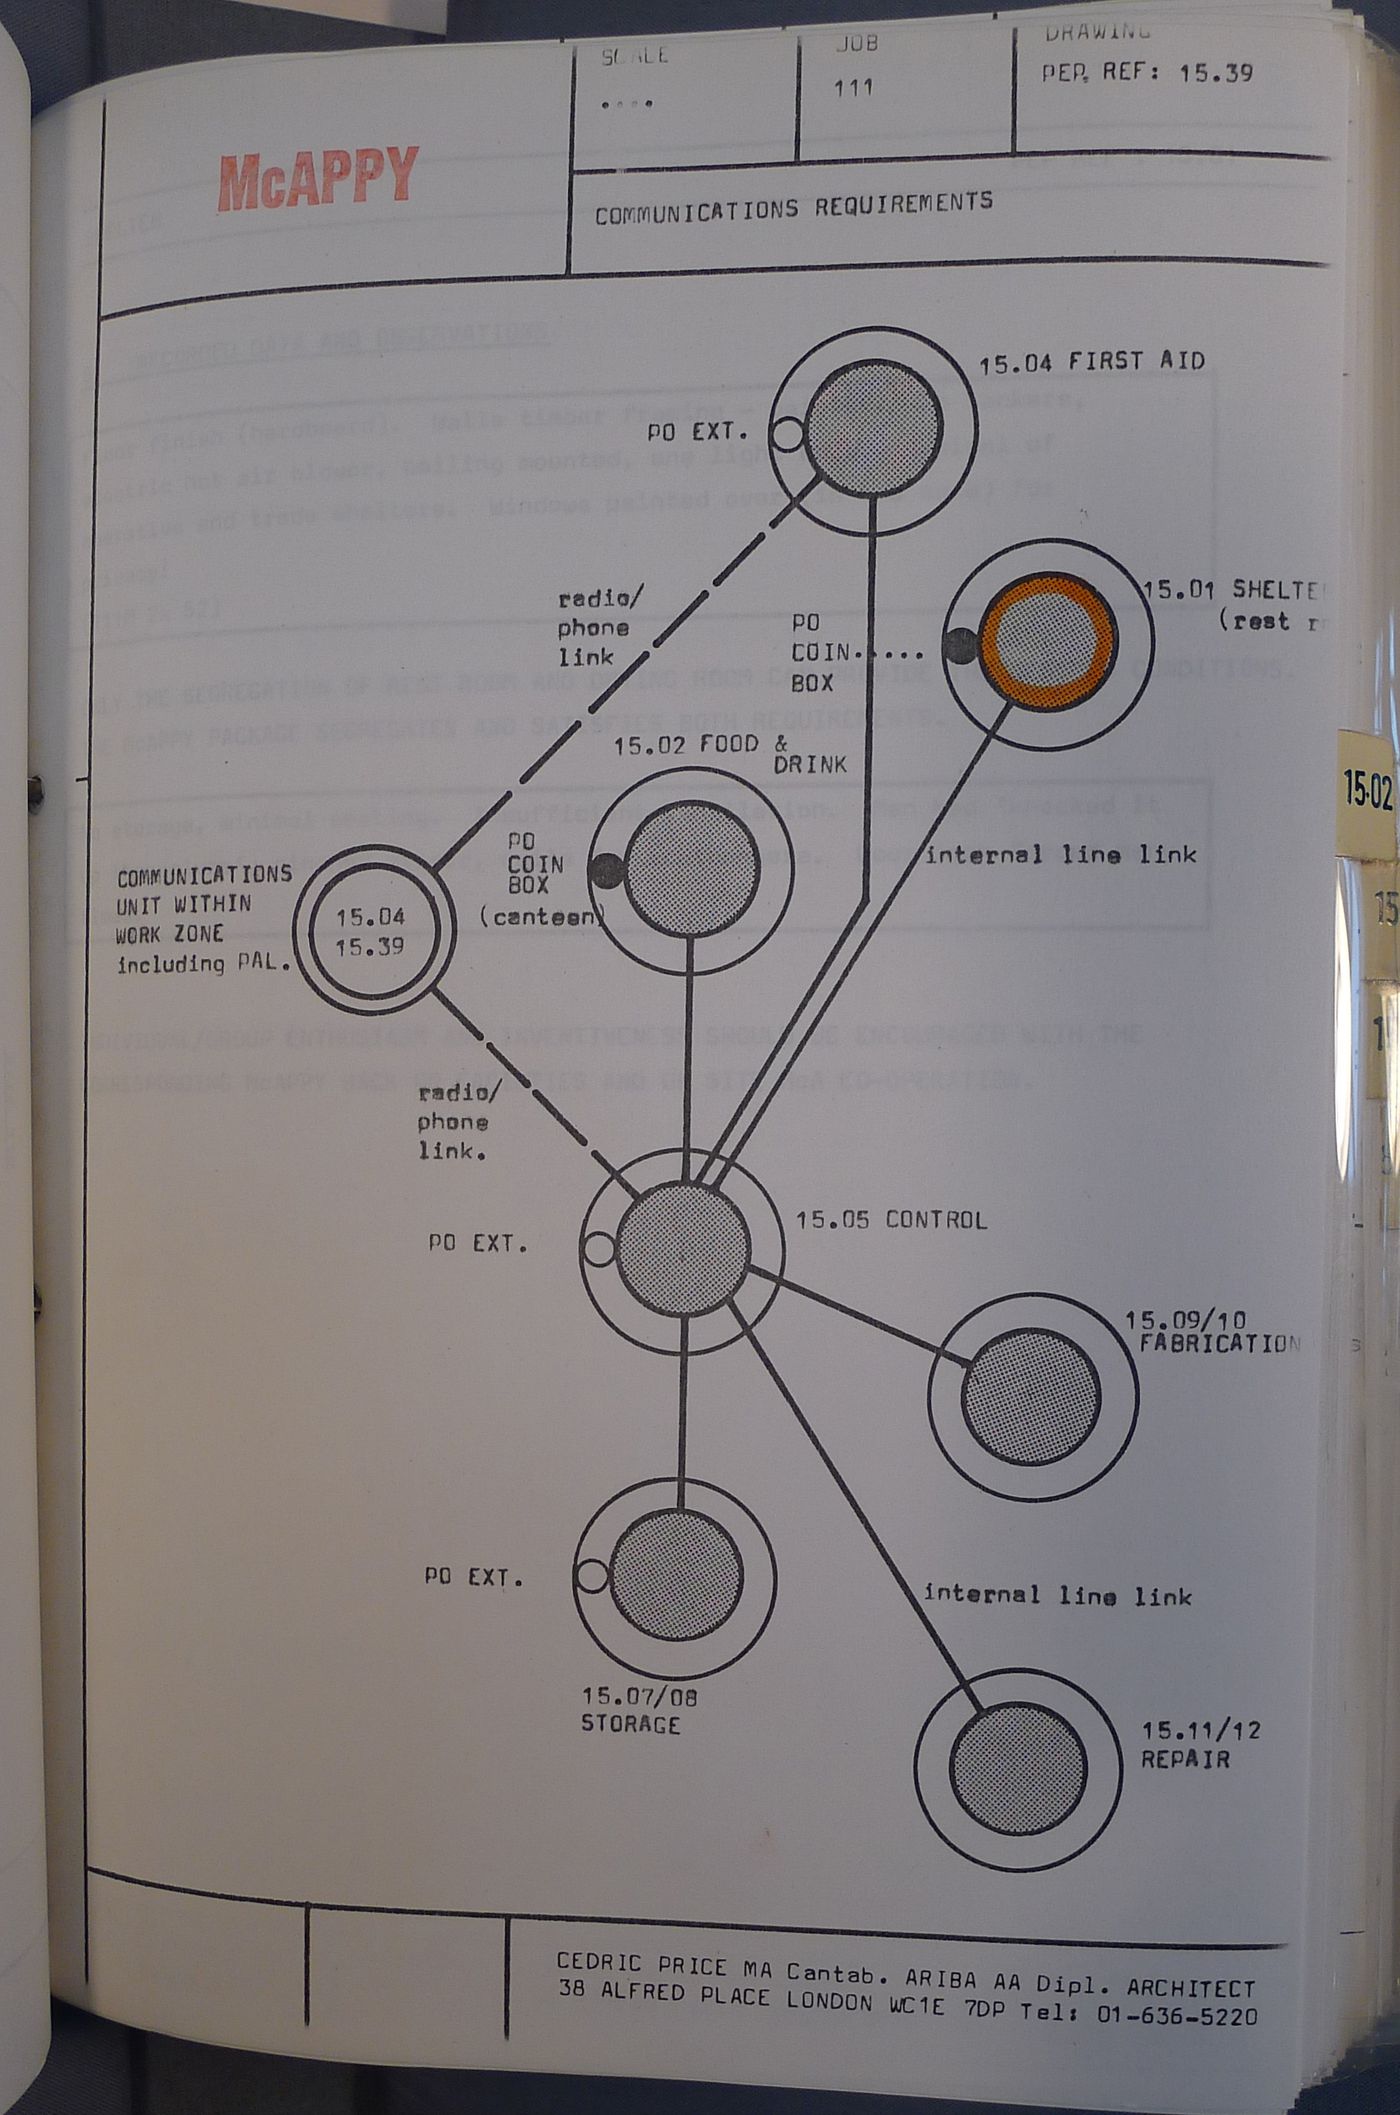 McAppy: diagram illustrating communication requirements (from McAppy report. Office copy. Volume 2)